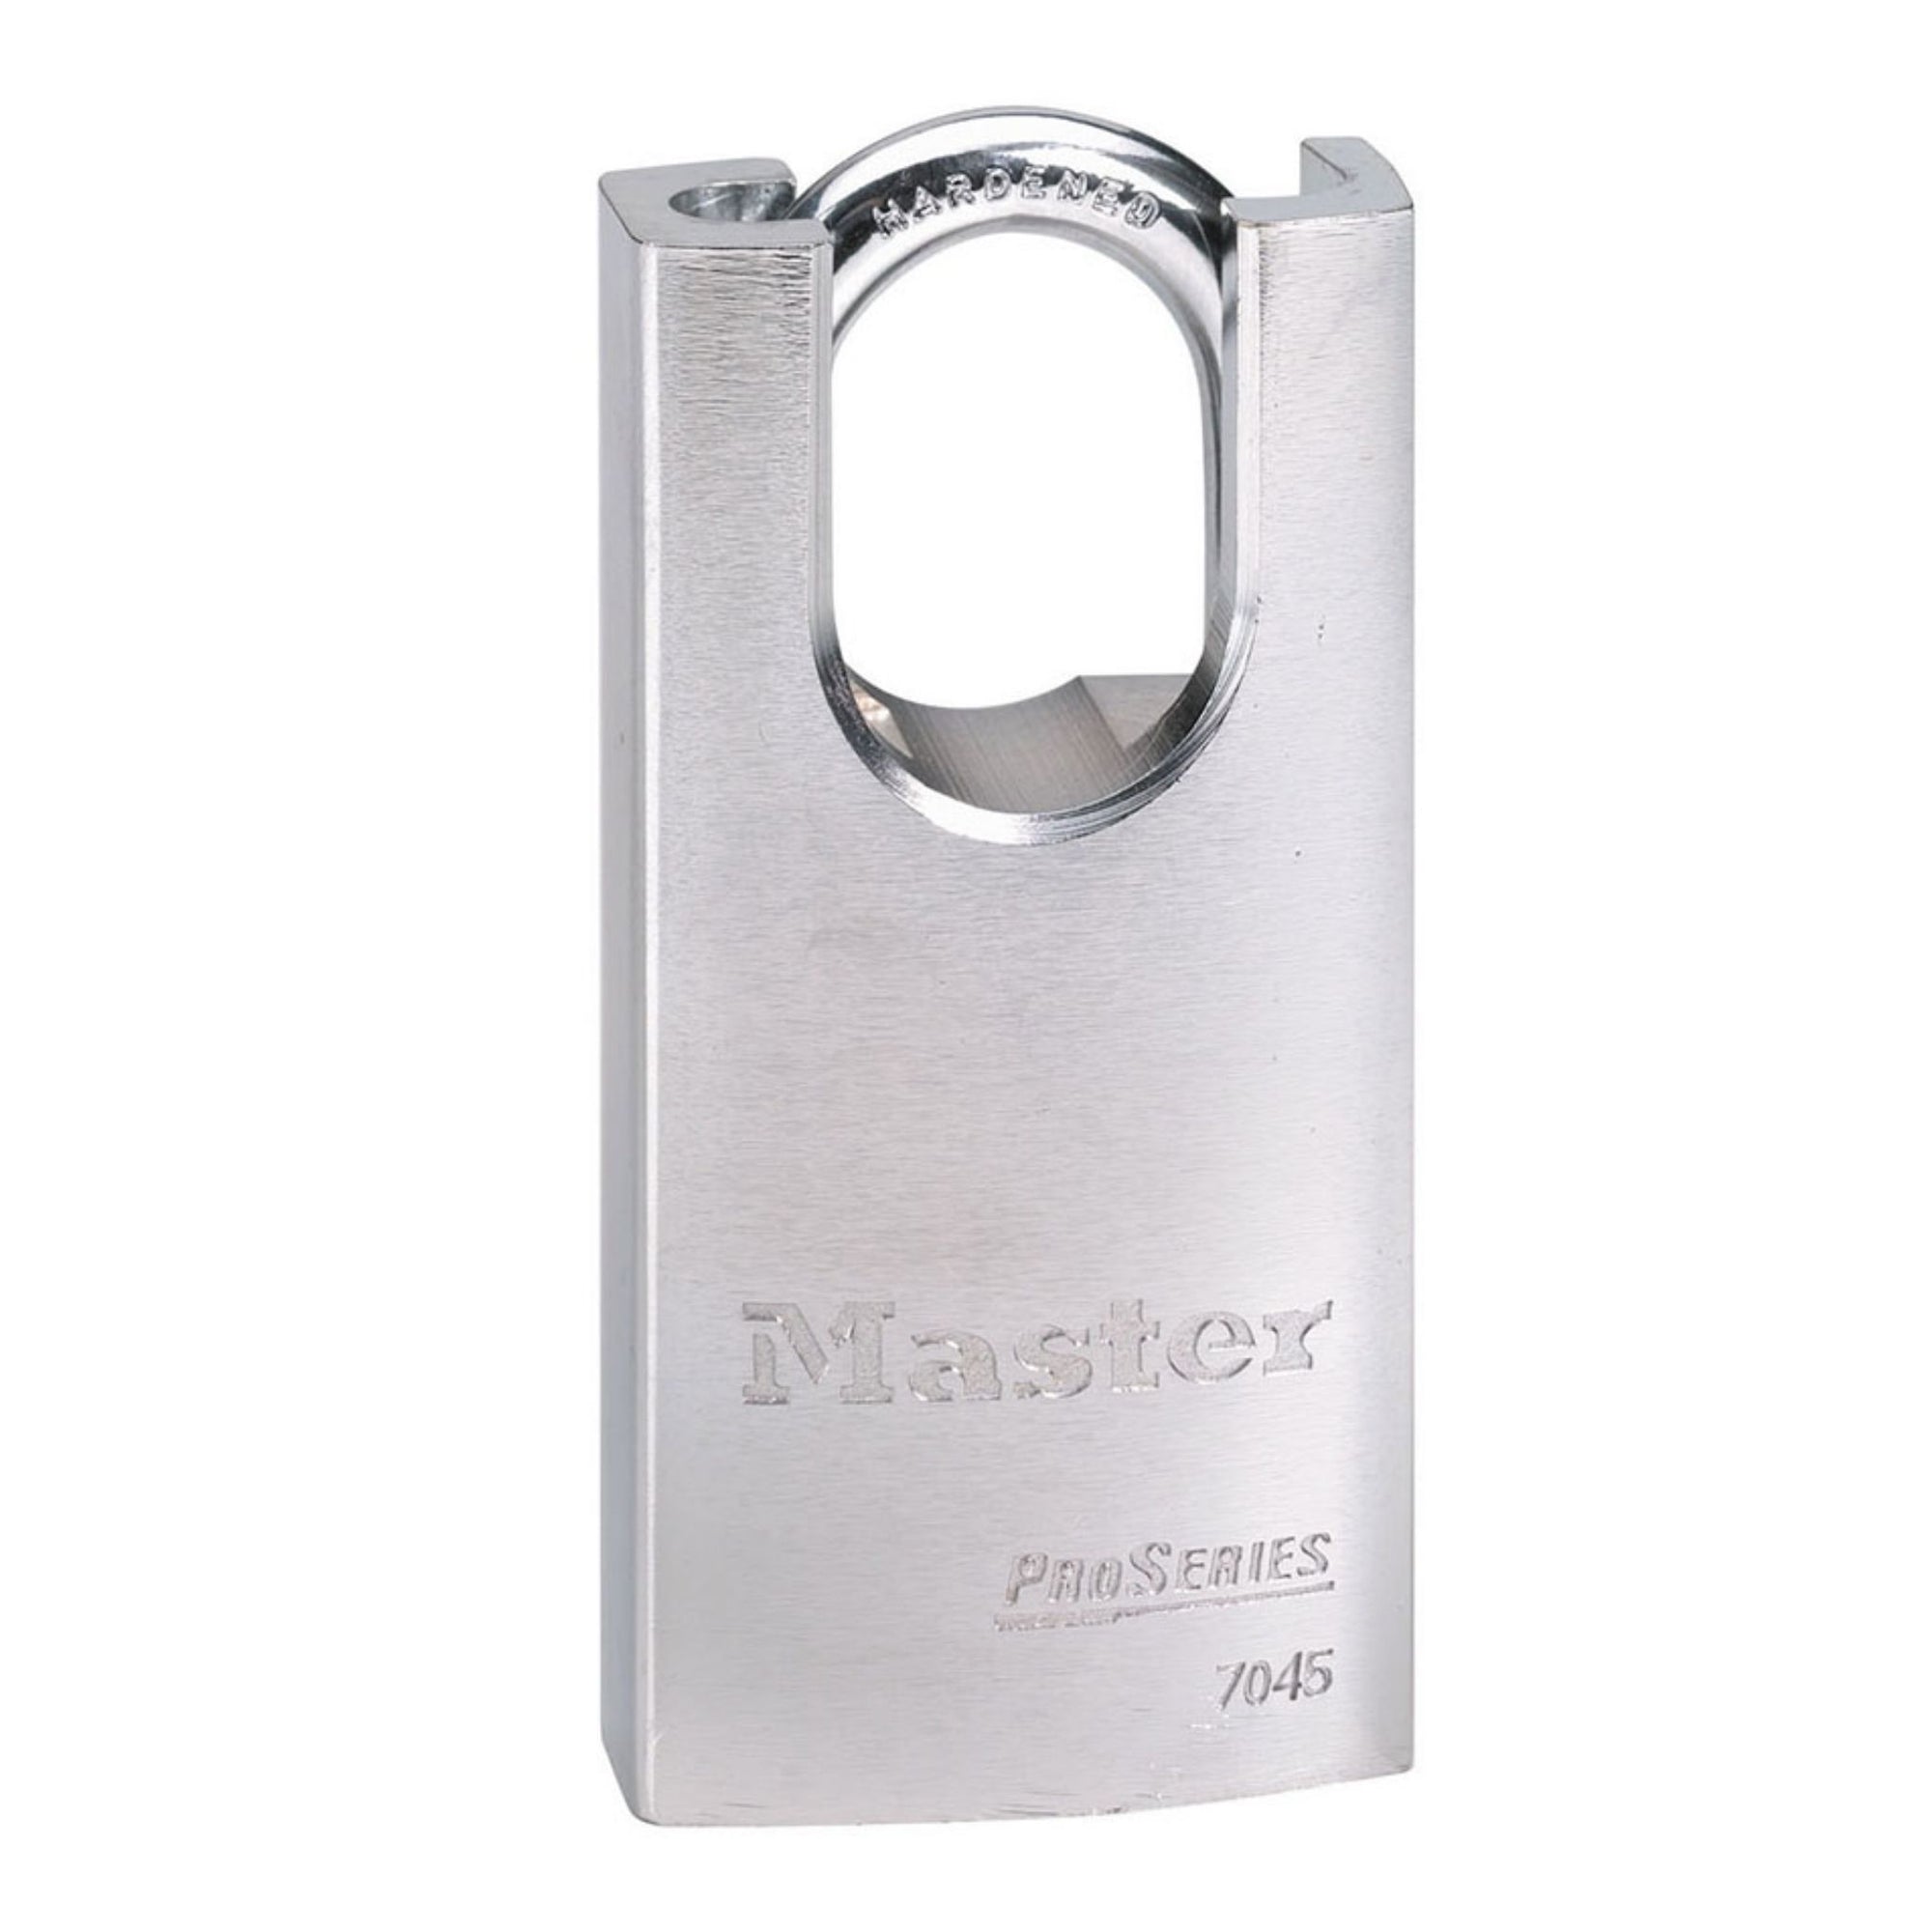 Master Lock 7045KD Pro Series Padlock with Shrouded Shackle - The Lock Source